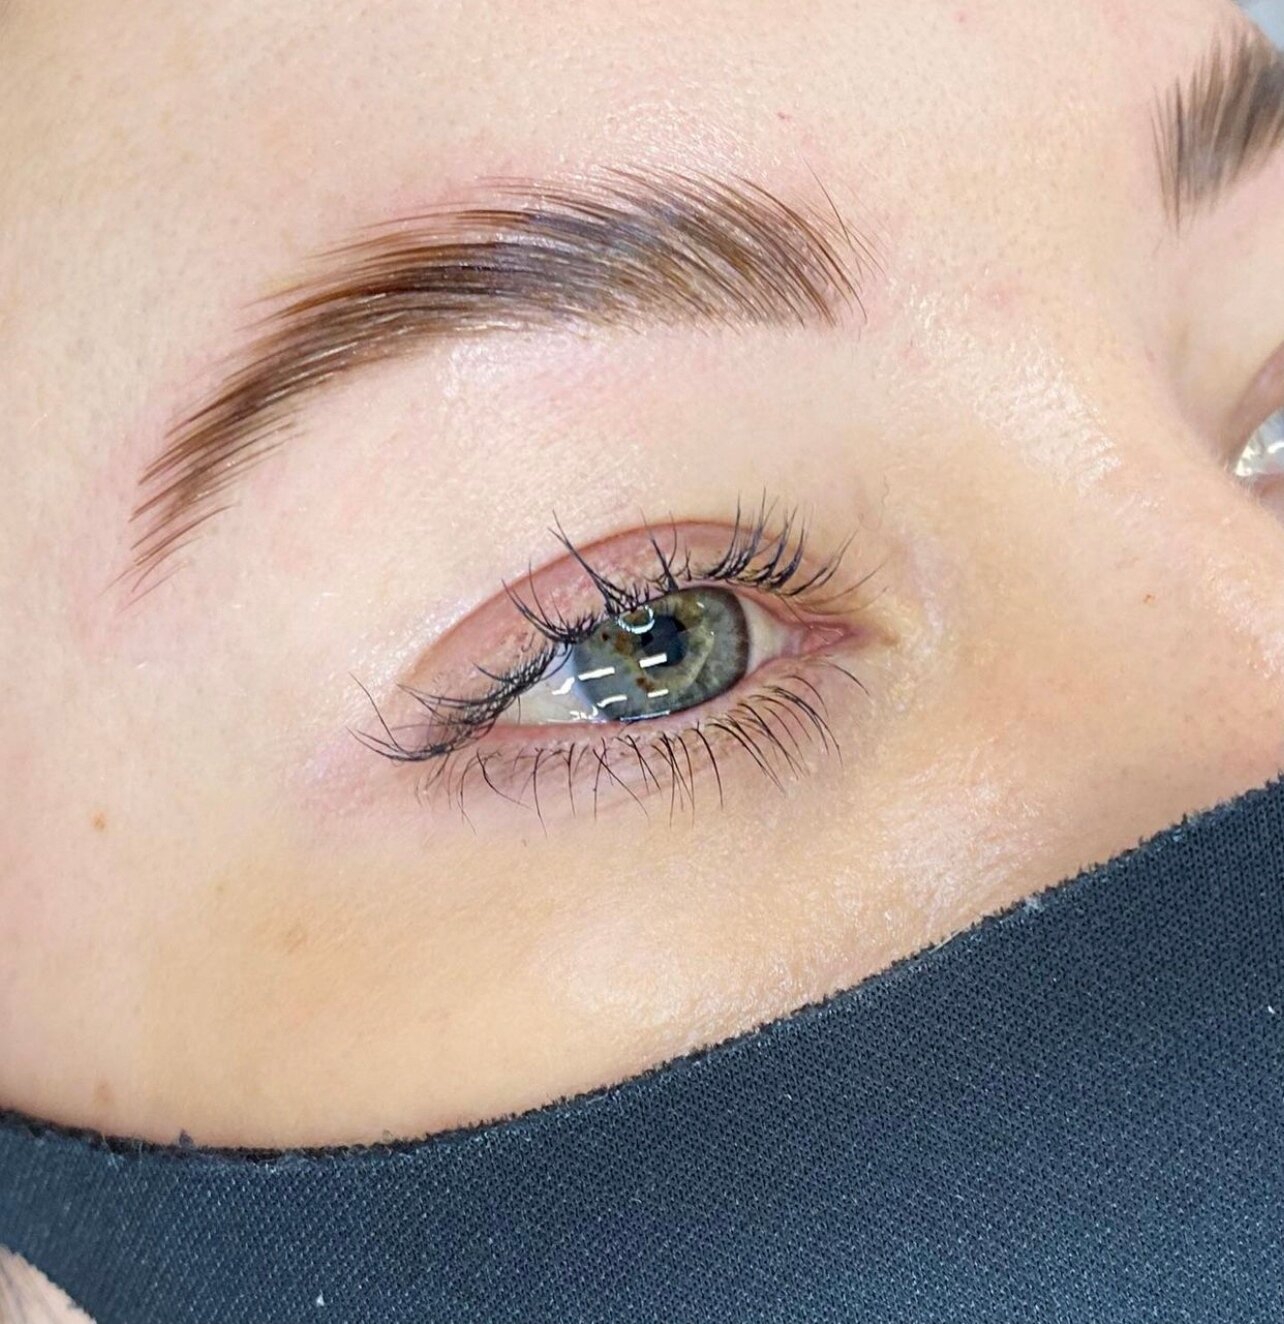 Brow Lamination/ Wax/ Tint is the best combination 😍 Book directly with @brows.by.sara !⁠
⁠
⁠
⁠
⁠
#browlamination #longbeach